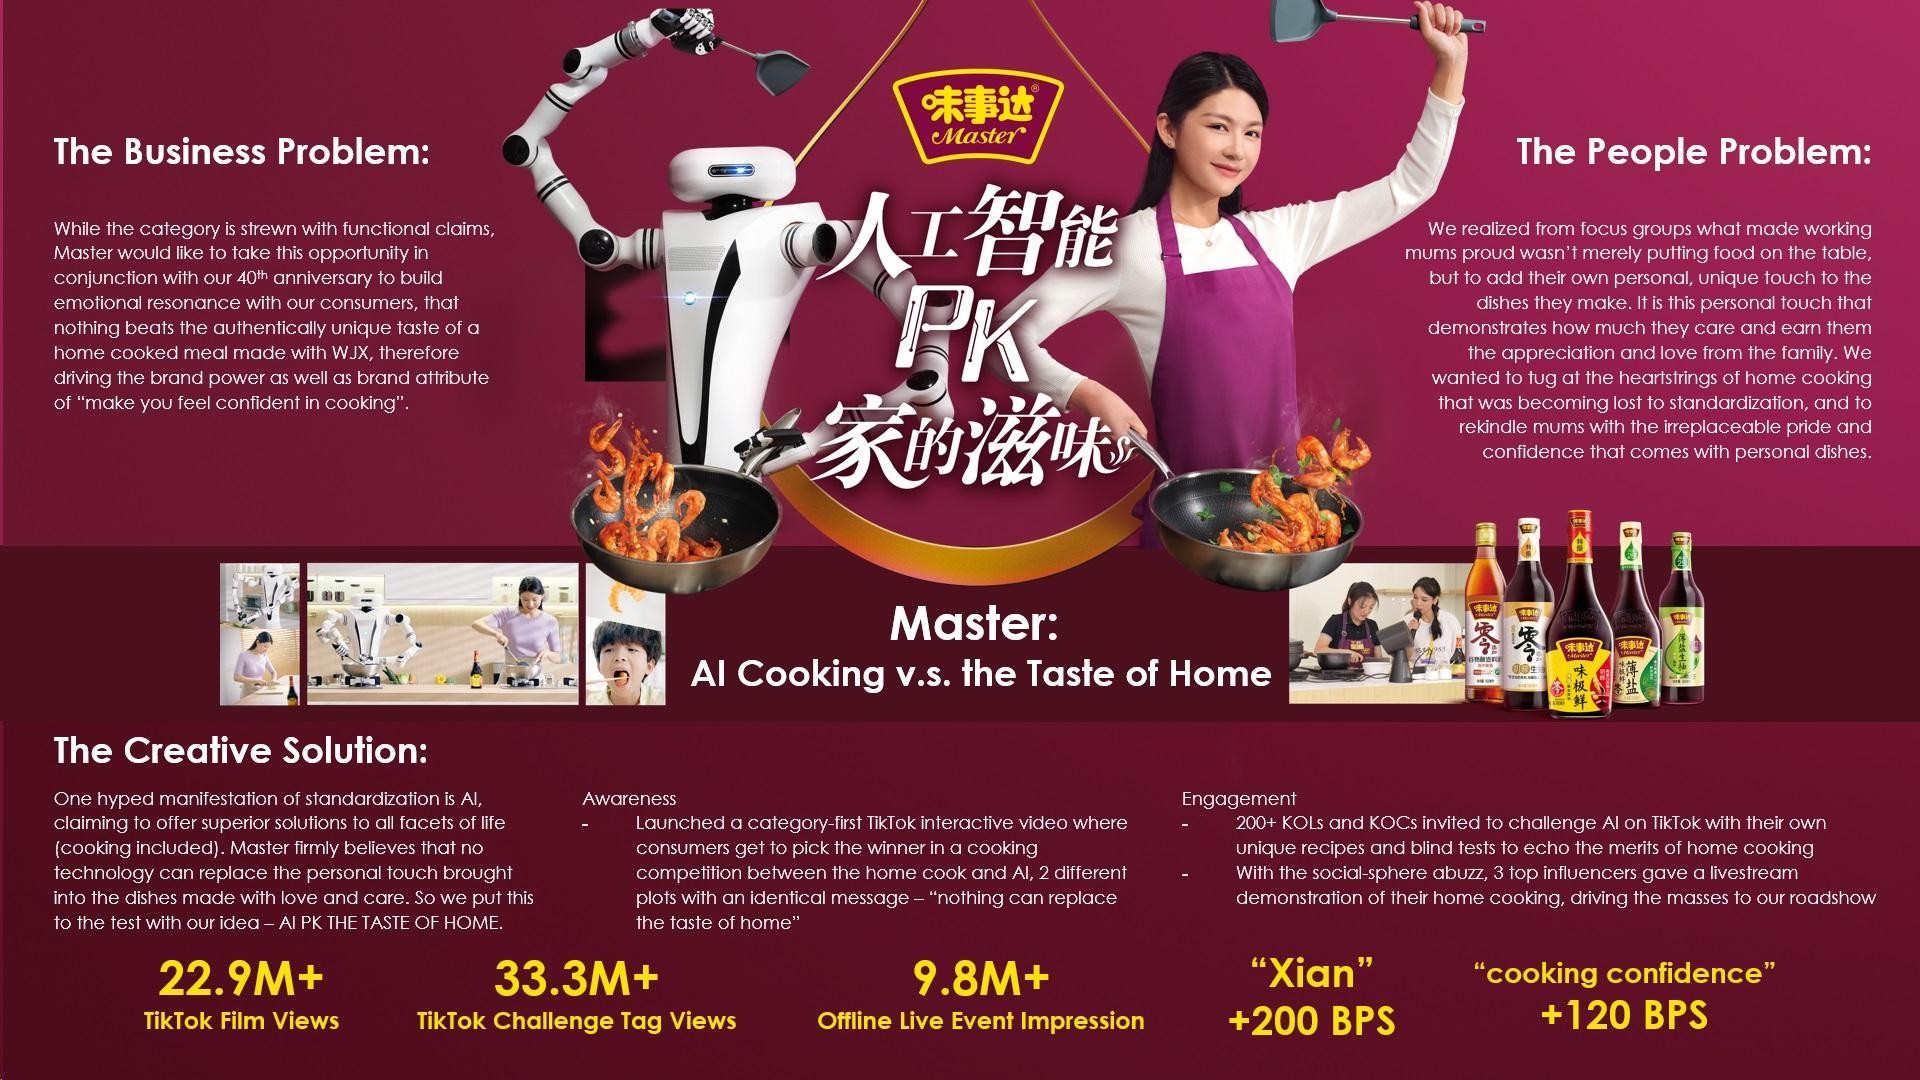 Master: AI Cooking V.S. the Taste of Home